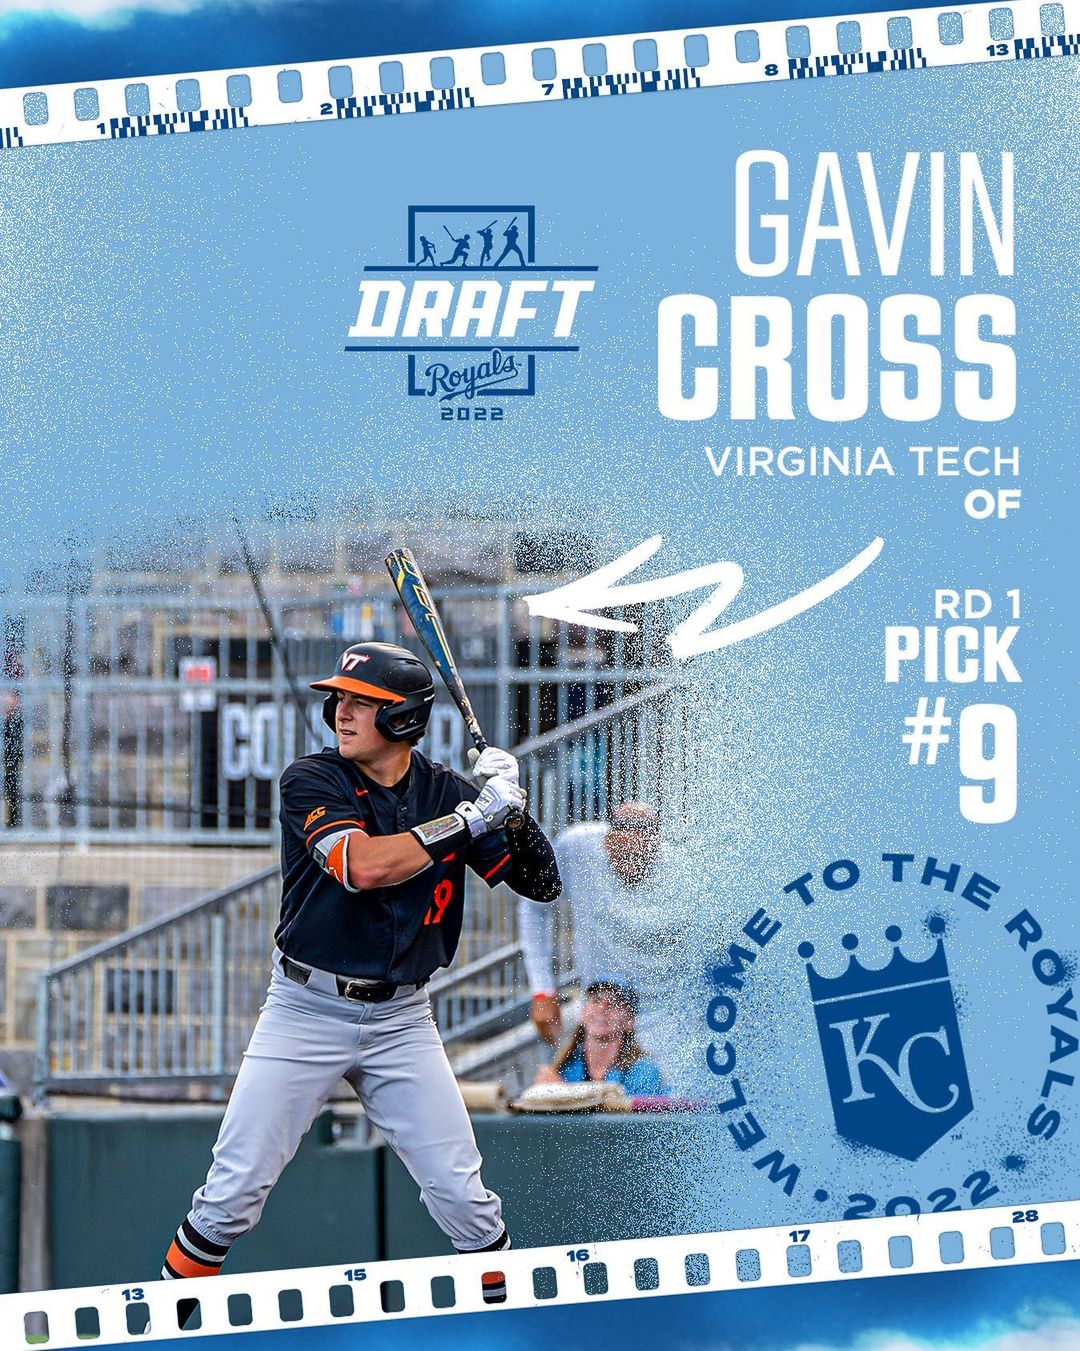 Welcome to the Royals, @gavin.cross!...